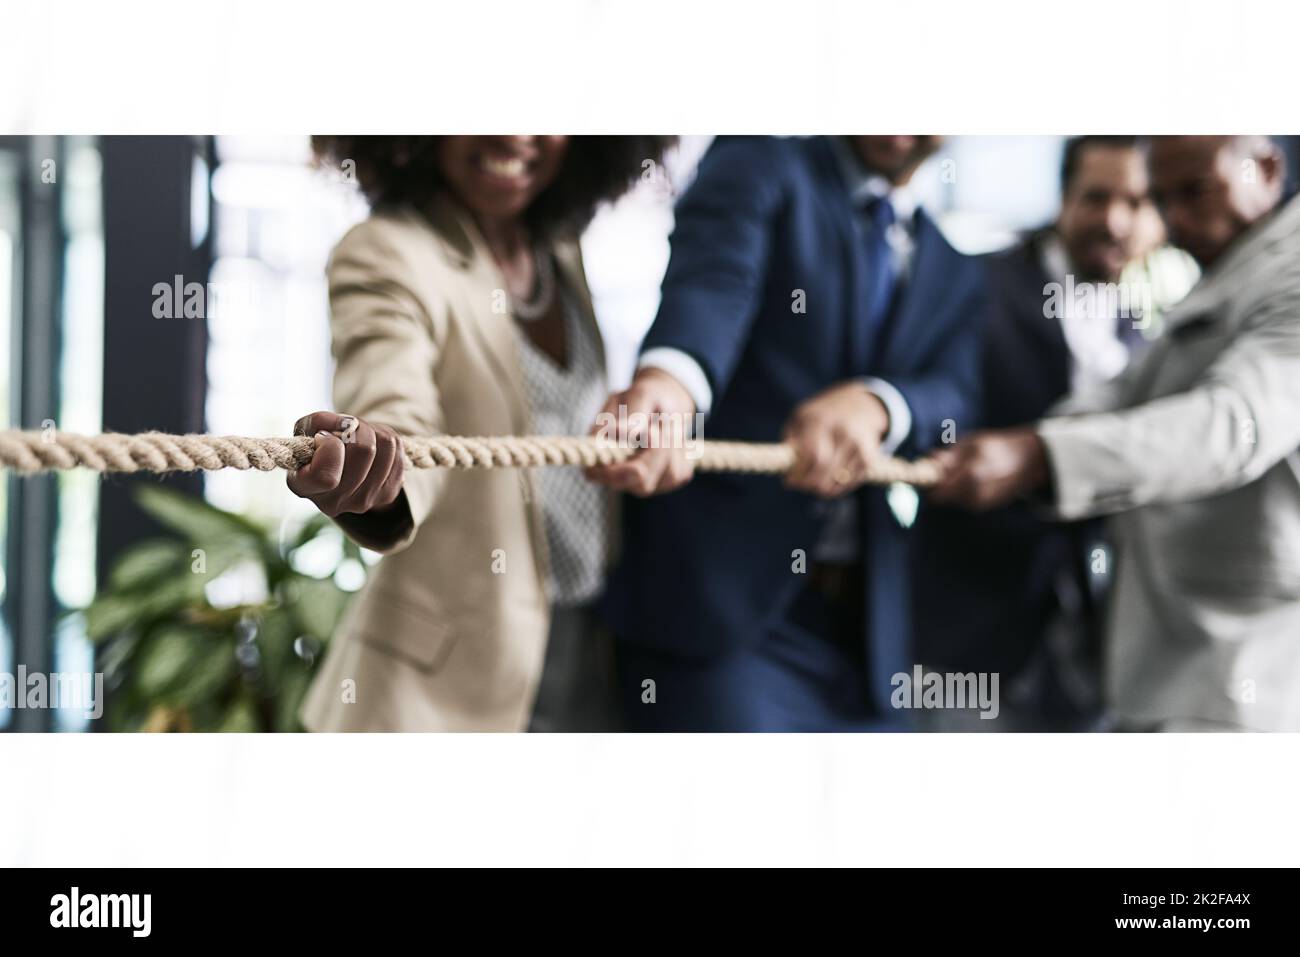 Challenges can be overturned with teamwork. Closeup shot of a group of unrecognizable businesspeople pulling together on a rope in an office. Stock Photo